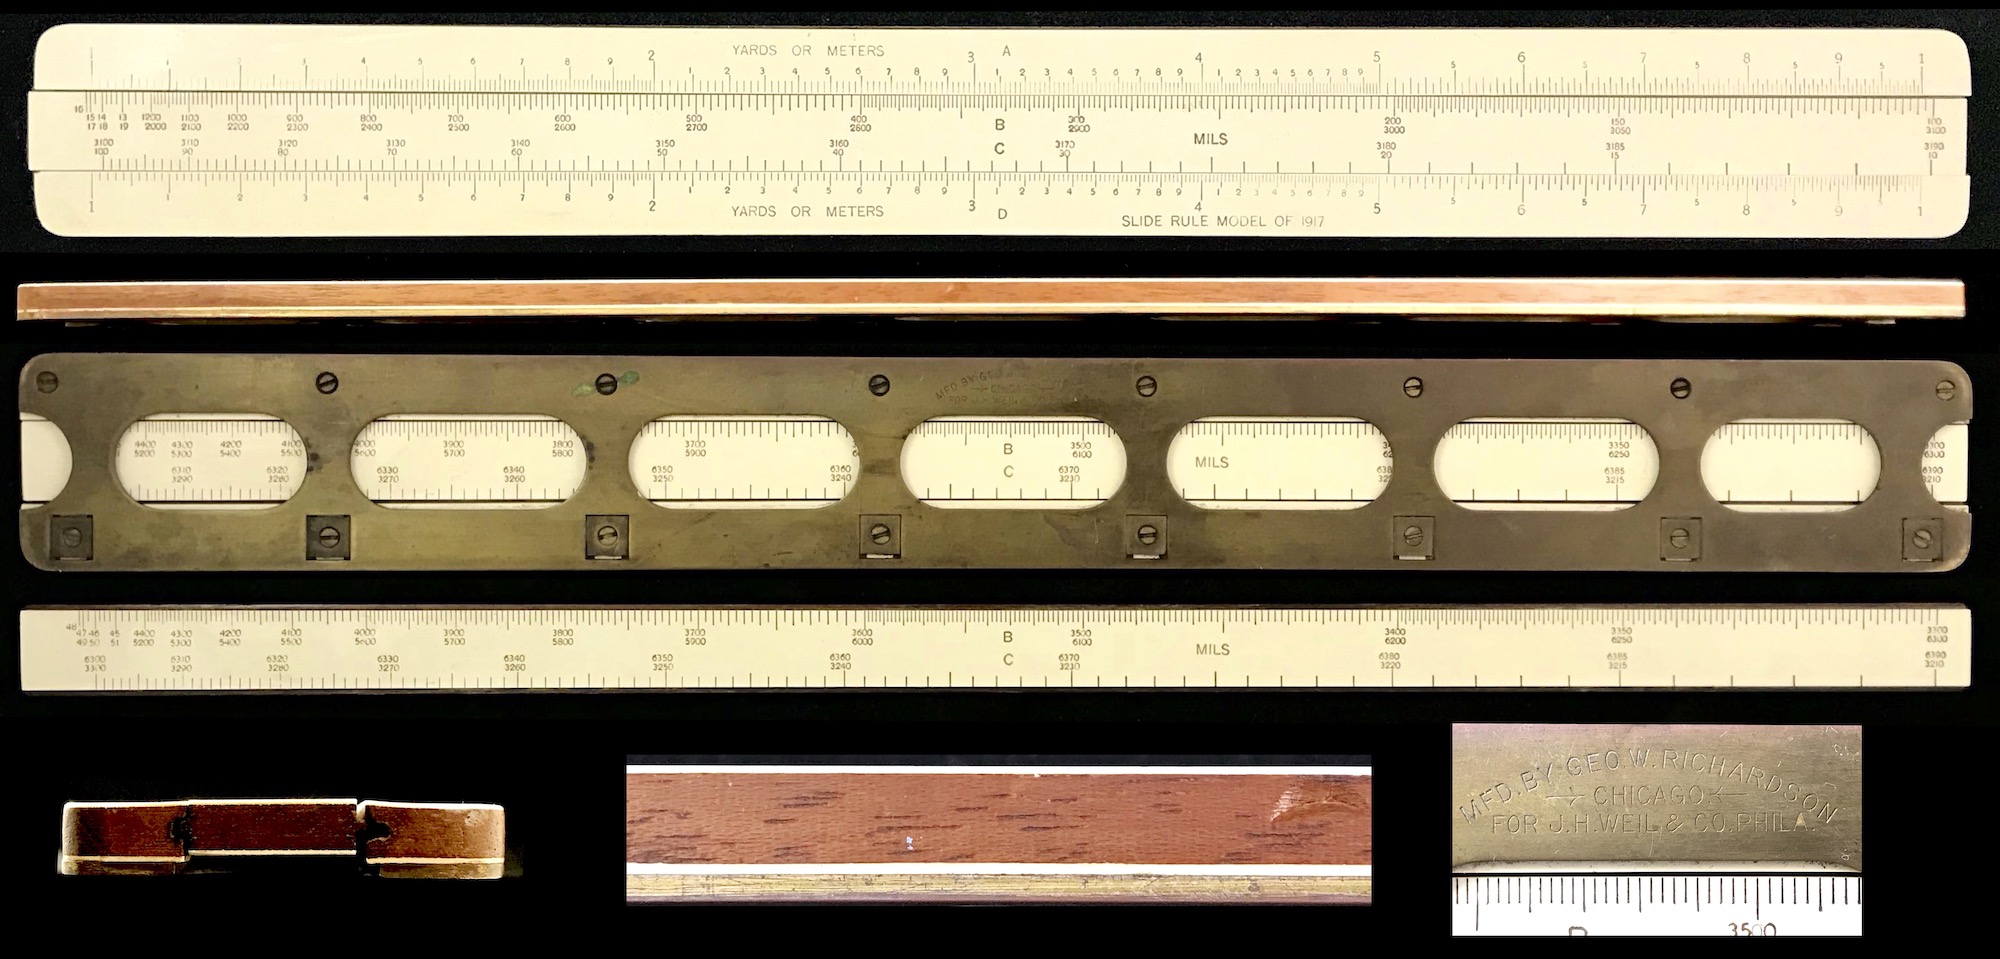 The Slide Rule Model of 1917, made by Richardson for J.H. Weil & Co.